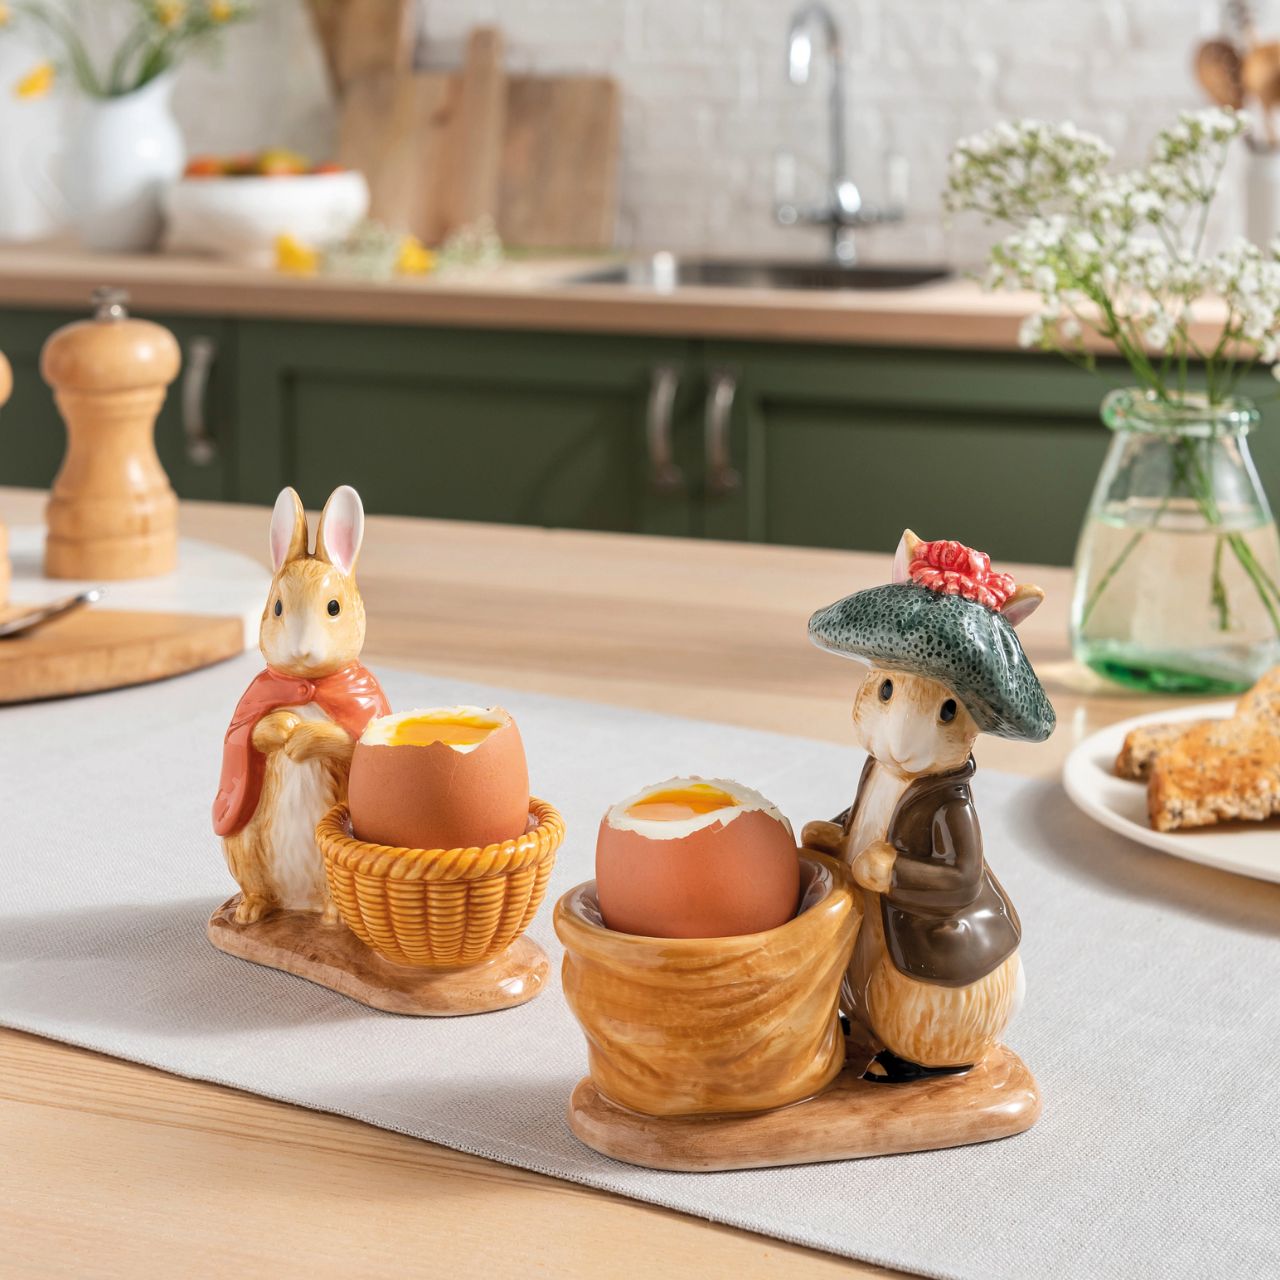 Peter Rabbit Flopsy Egg Cup  Serve your morning eggs in style with our unique and charming Flopsy egg cup, because regular egg cups aren't all they're cracked up to be... This beautiful Beatrix Potter egg cup has been made from sturdy ceramic and makes the ideal. collector's piece or gift. We recommend you use large eggs to feel the true benefit, or why not fill with mini chocolate eggs for a sweet easter gift.